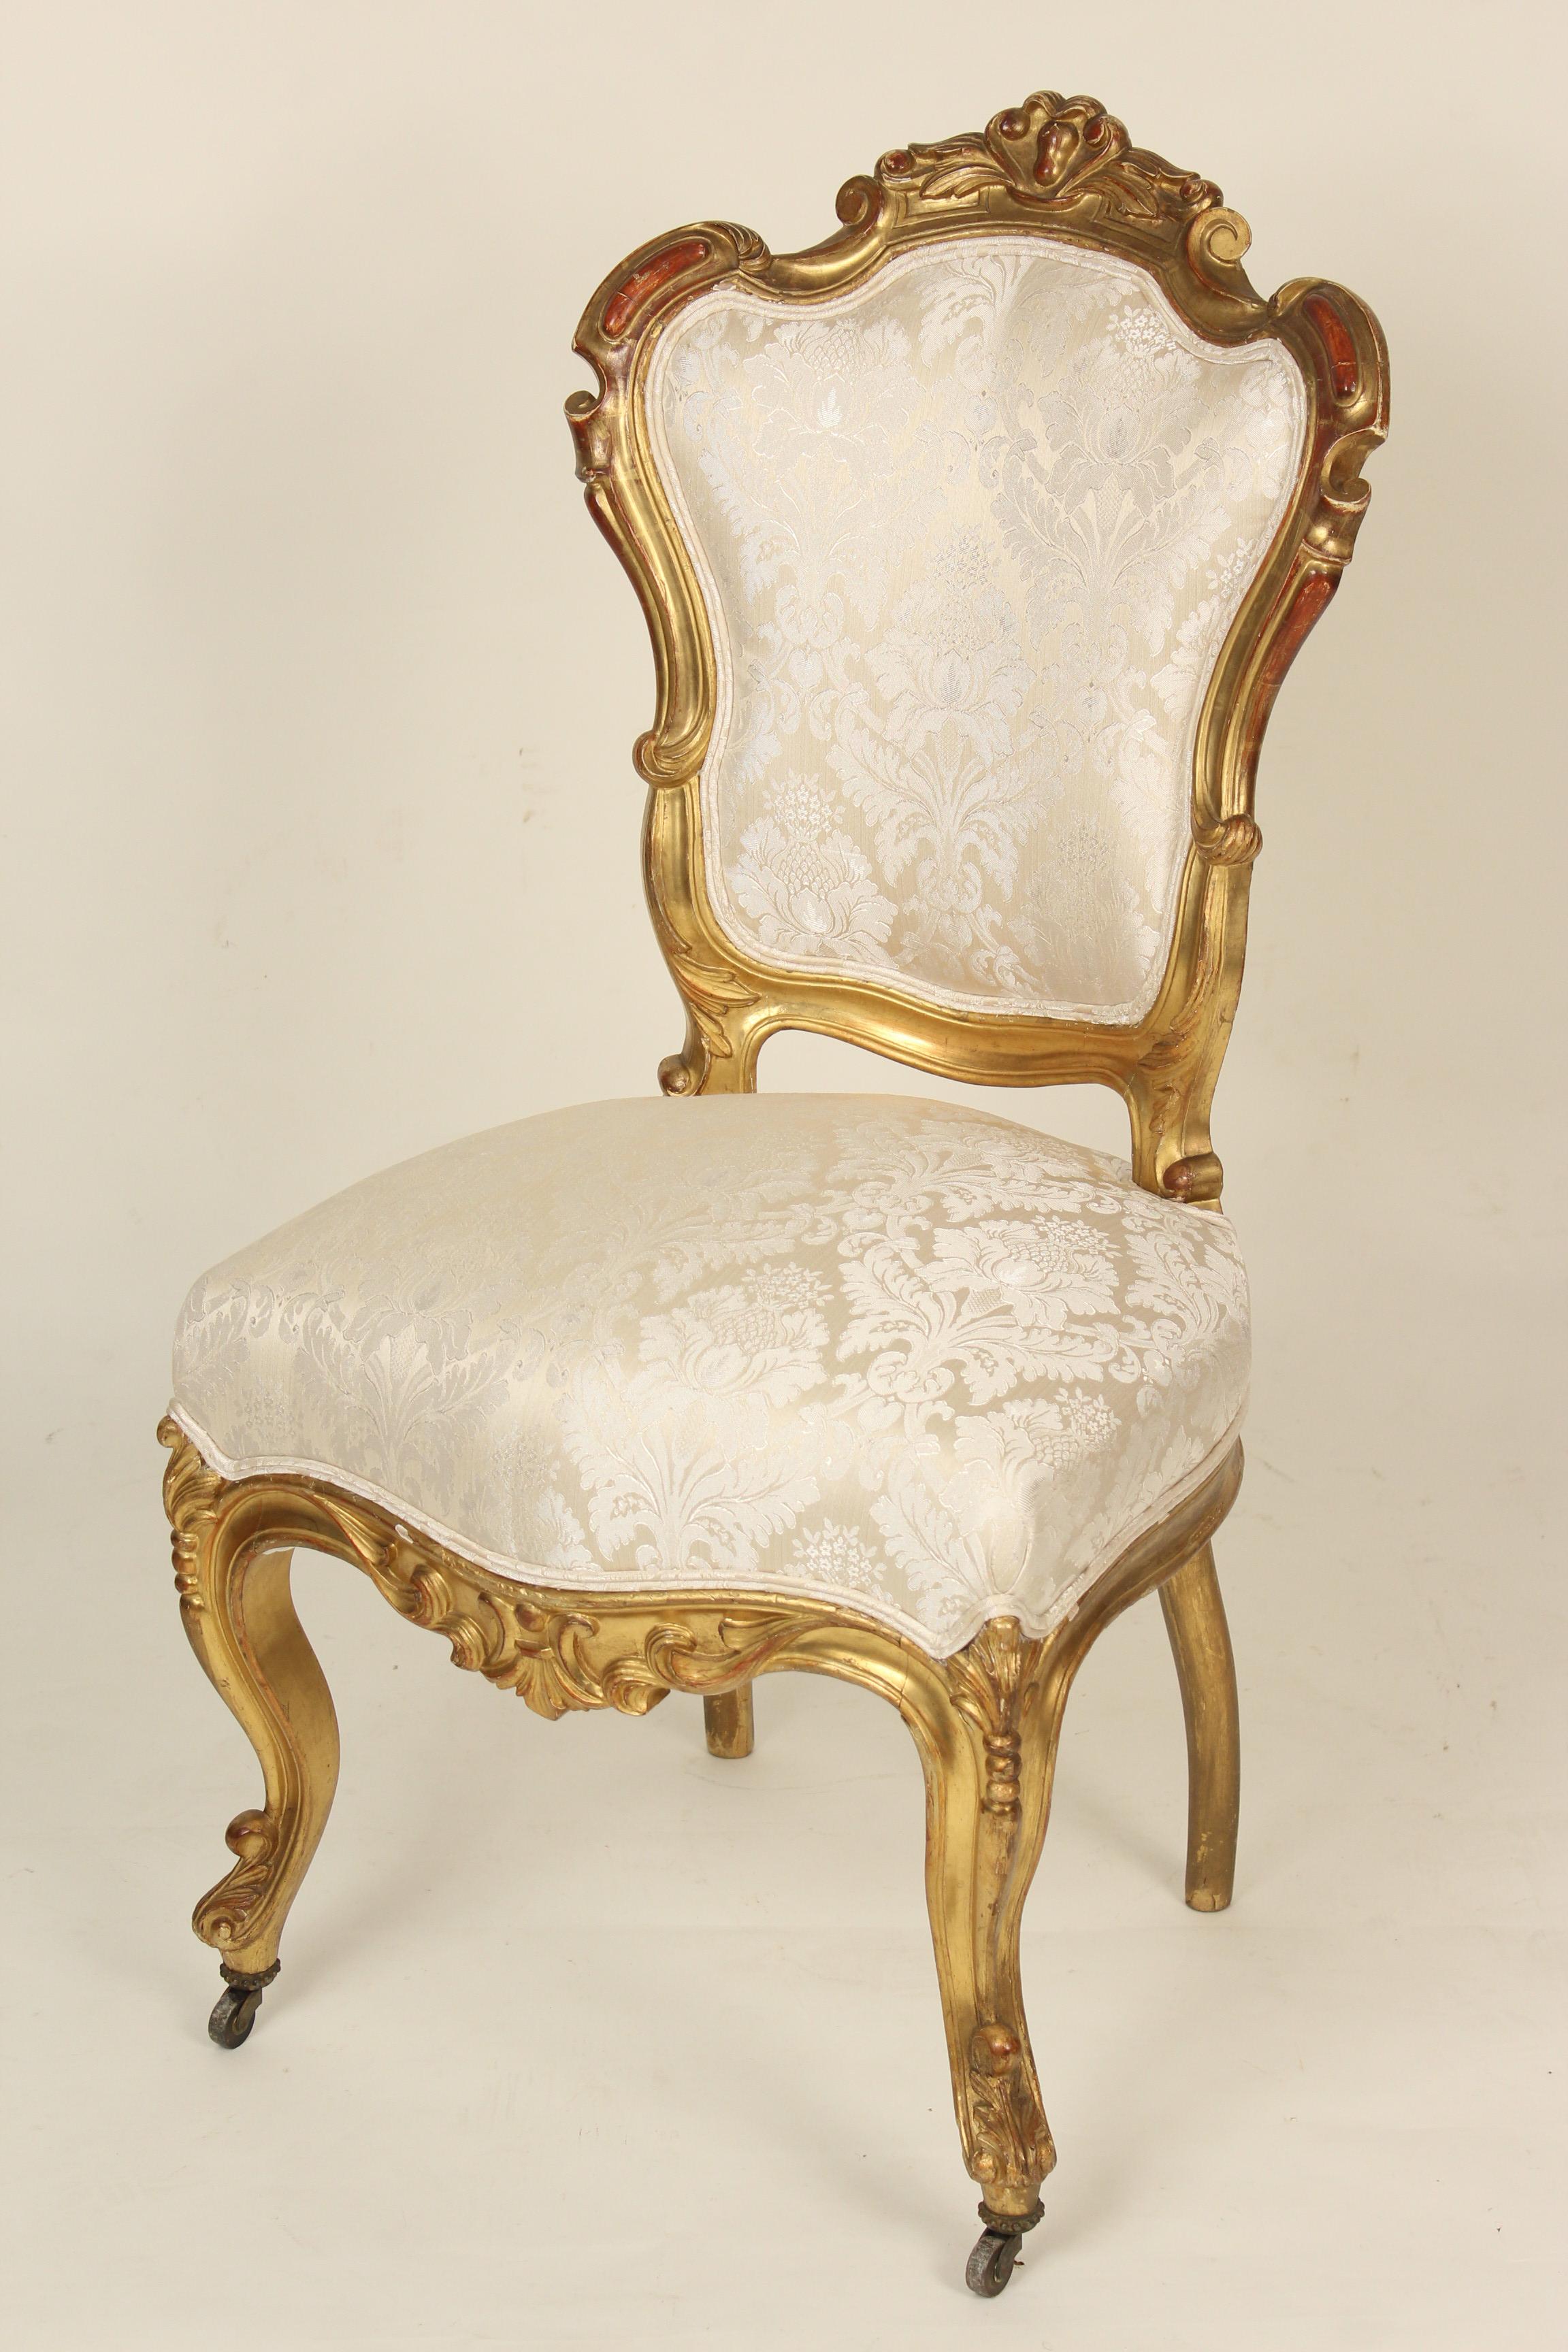 Set of 4 Napoleon III (Possibly Venetian), giltwood side chairs, late 19th century. These chairs have excellent original gilding with areas of touch up.